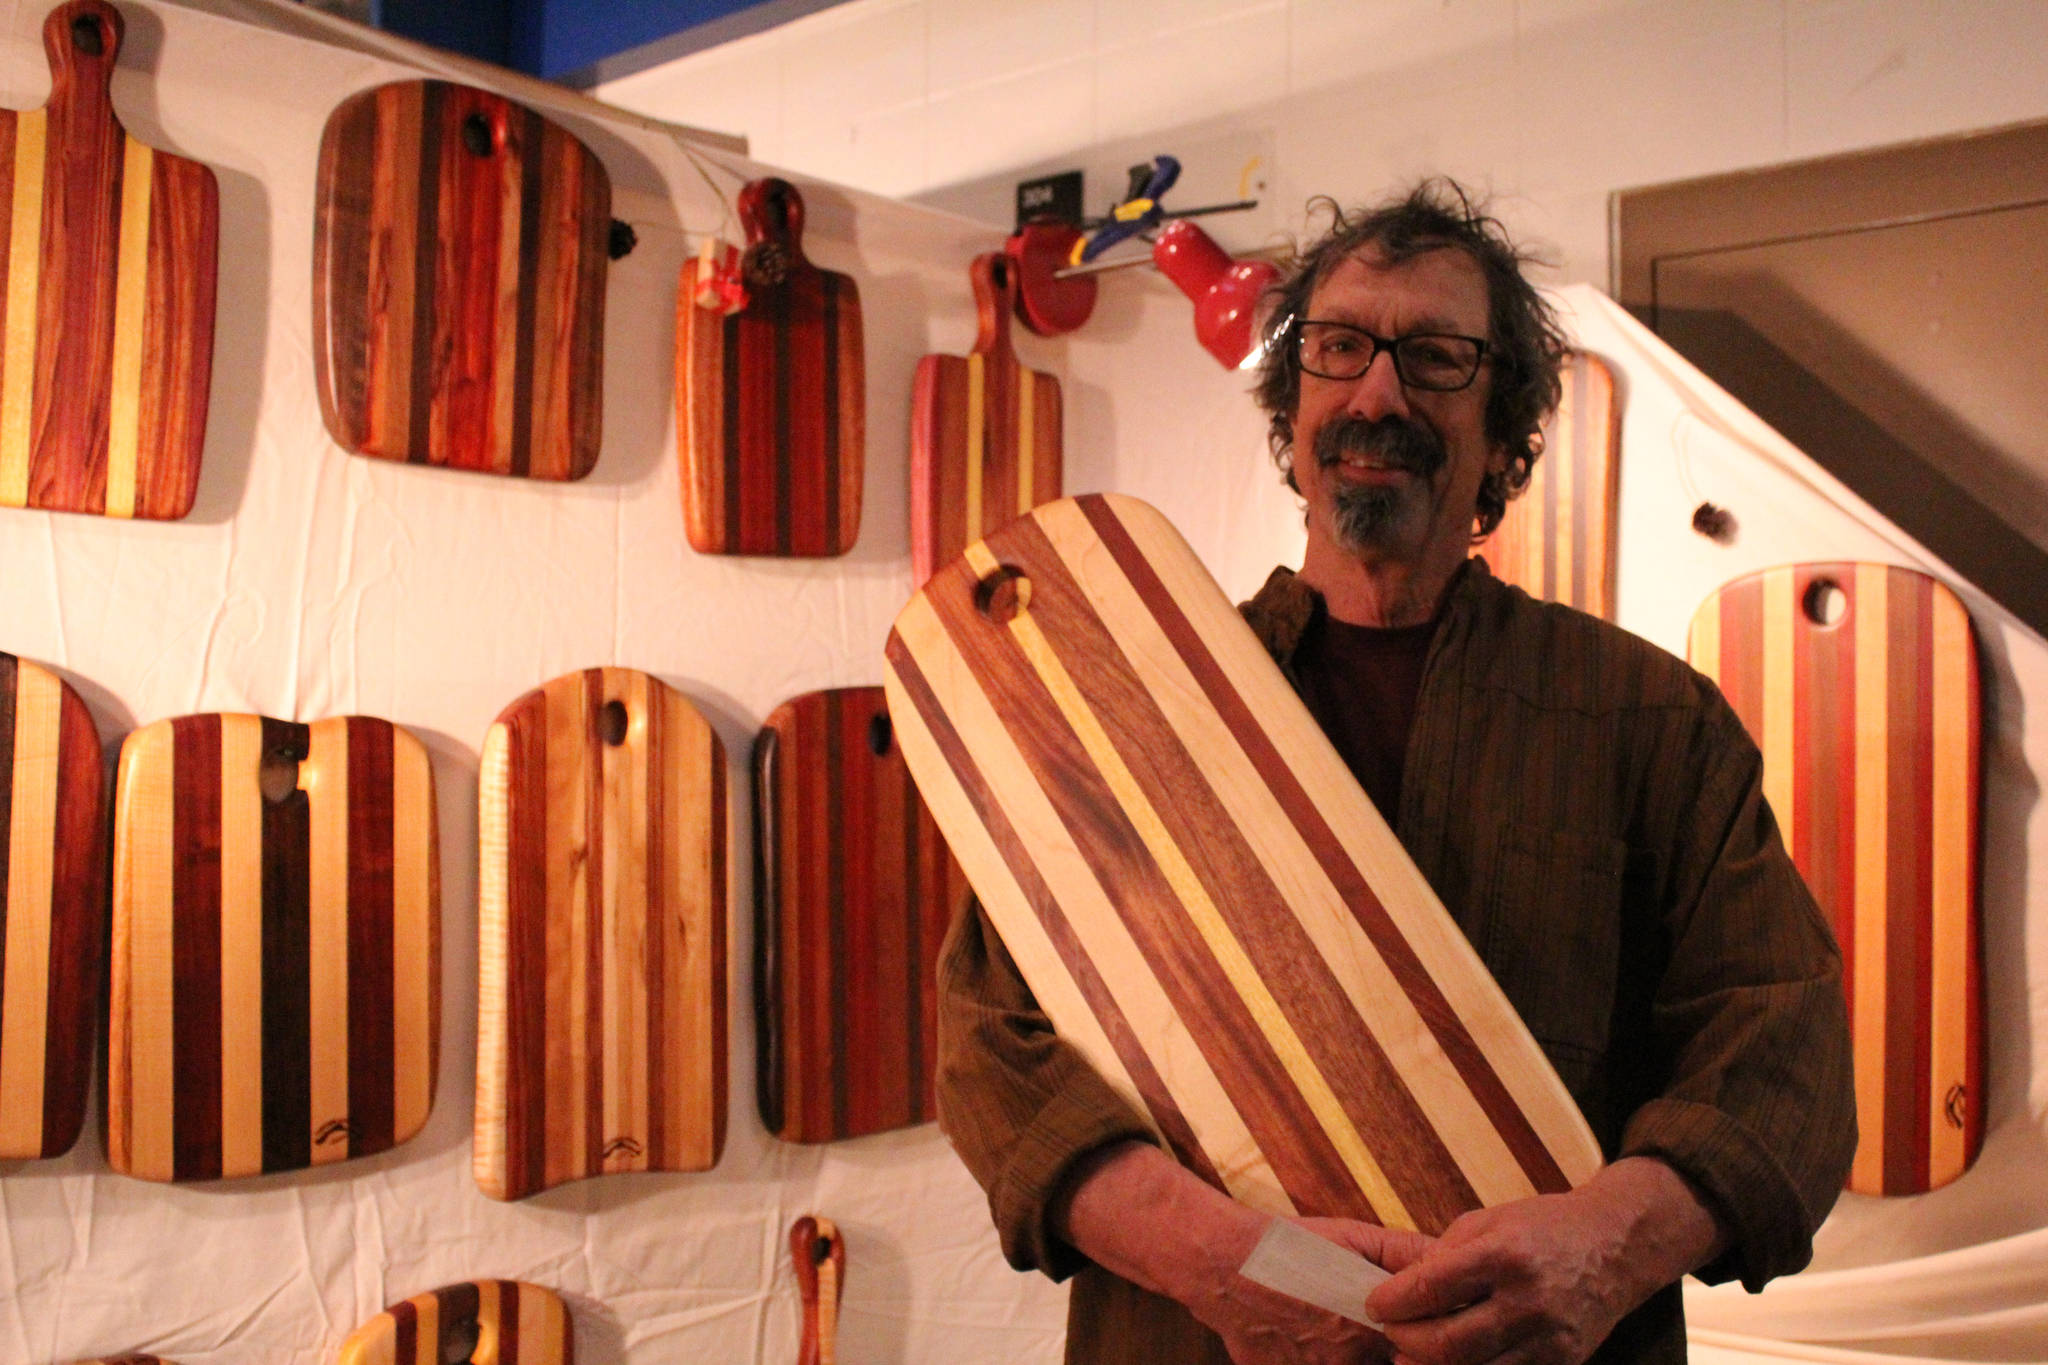 Paul Pellegrini shows off one of his custom-made cutting boards at his Homer Woods booth at the Nutcracker Faire on Saturday, Dec. 3.